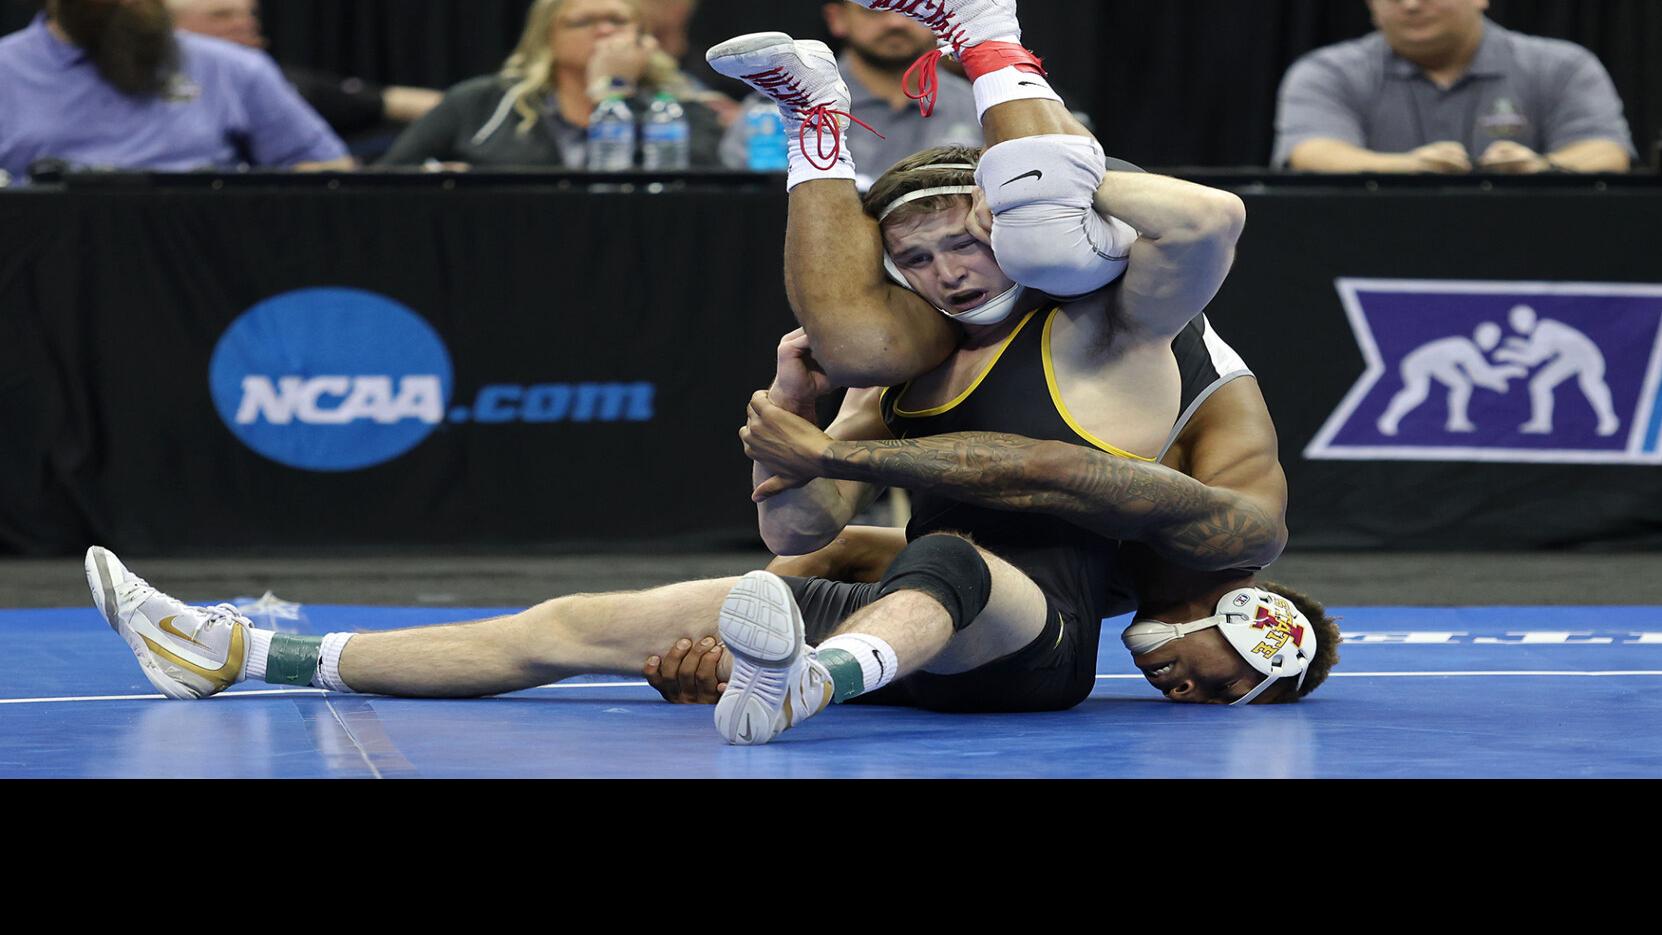 O'Toole stunned by Carr in NCAA Wrestling Championship semifinals at 165  pounds, Mizzou Sports